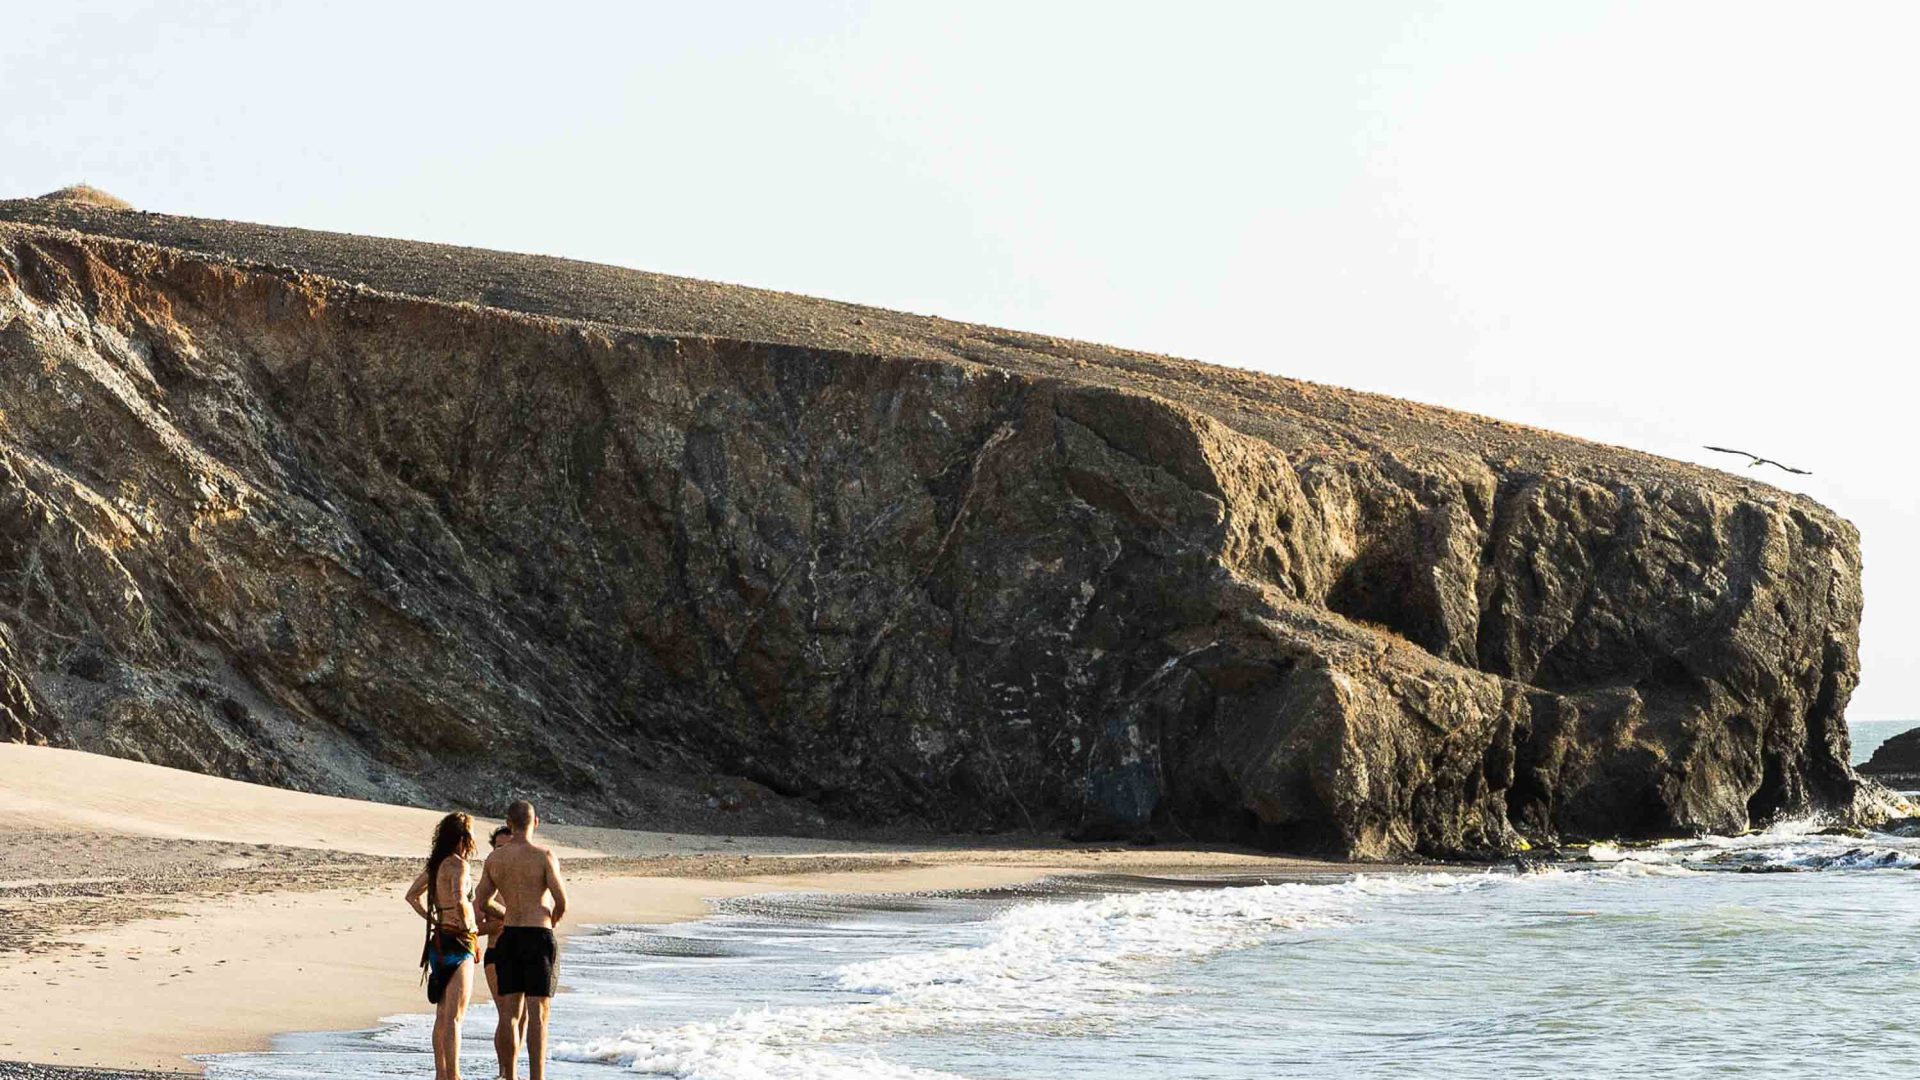 Two tourists stand by the shore at a beach fringed with cliffs.